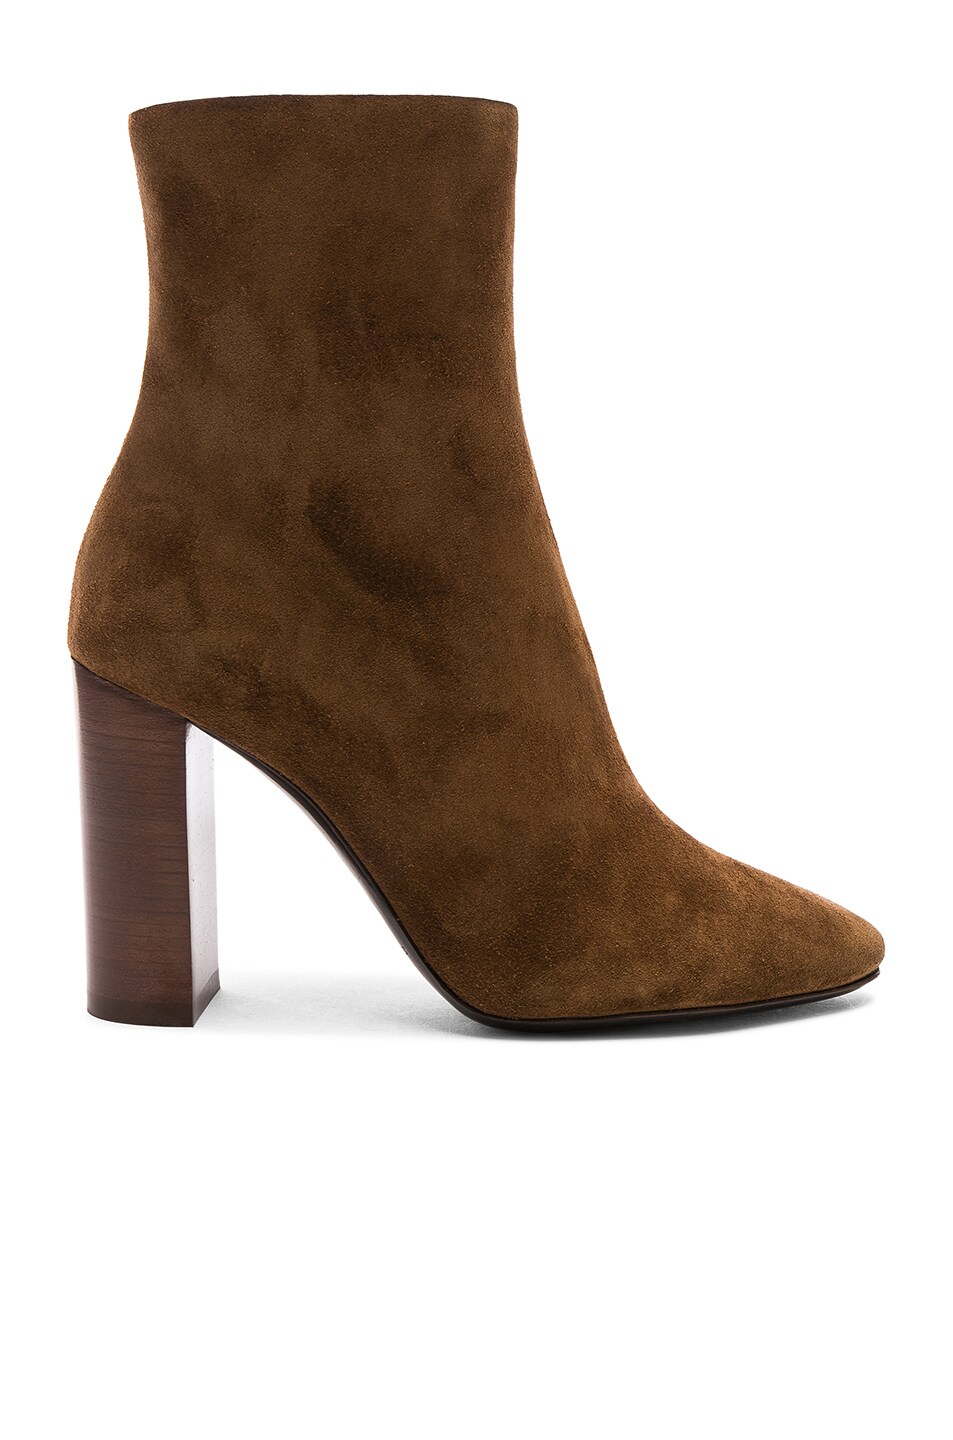 Image 1 of Saint Laurent Suede Lou Ankle Boots in Caramel